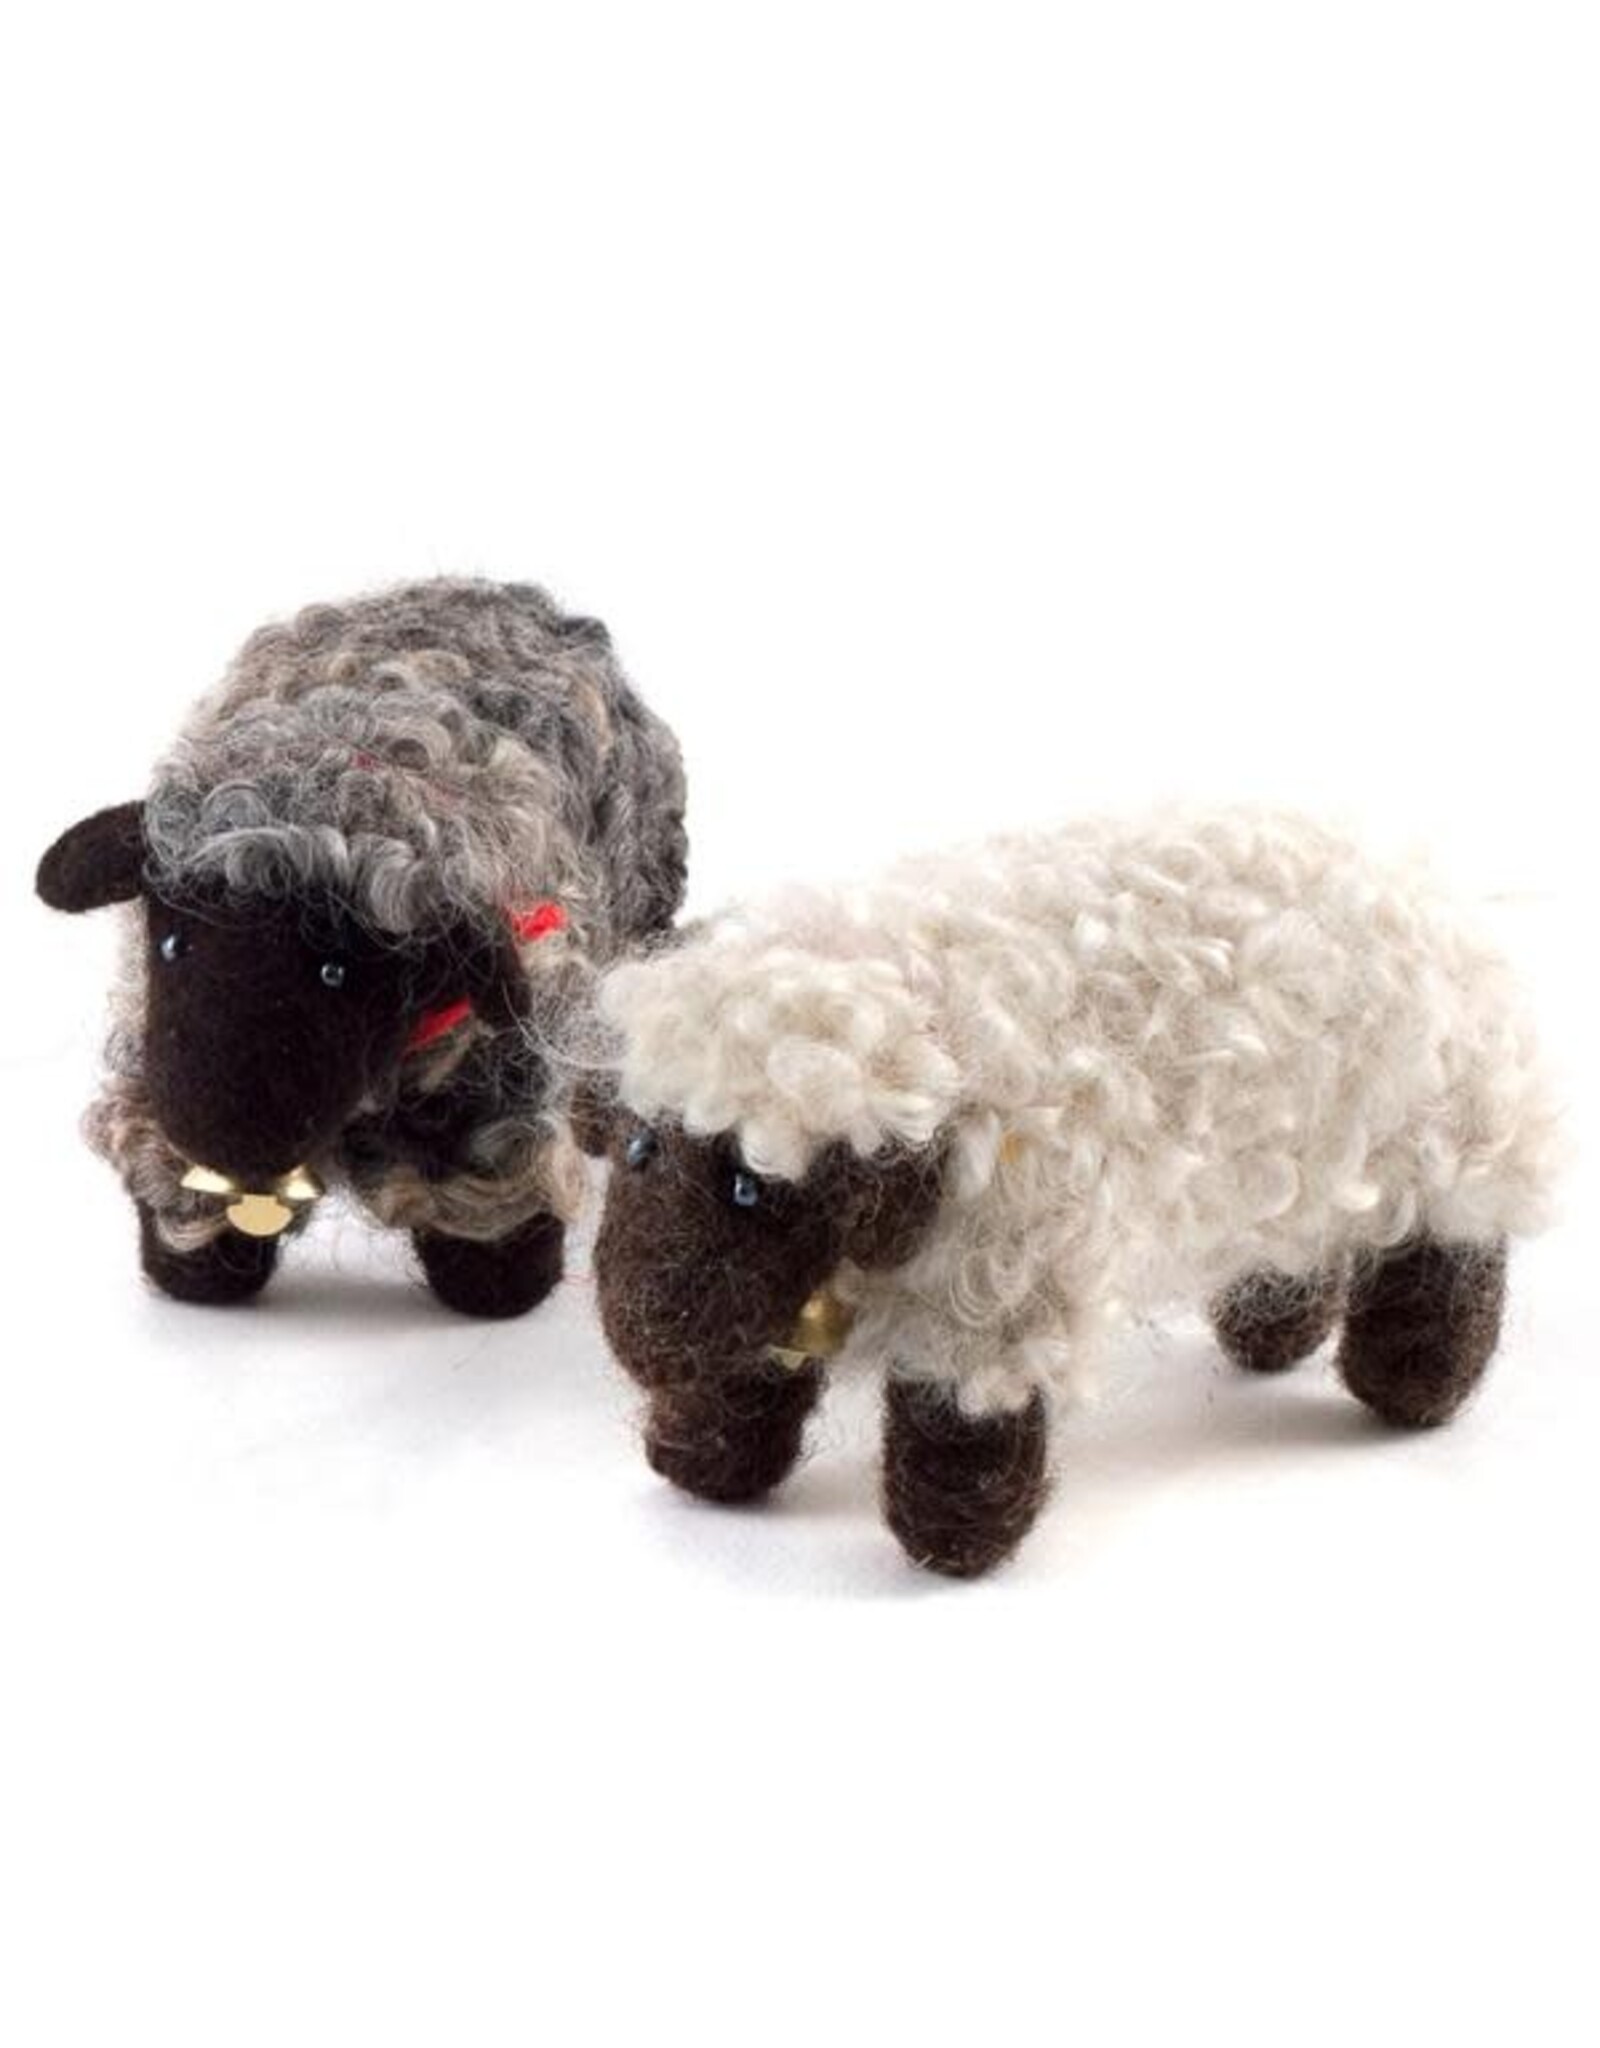 Trade roots Guatemala, Felted Wool Animals